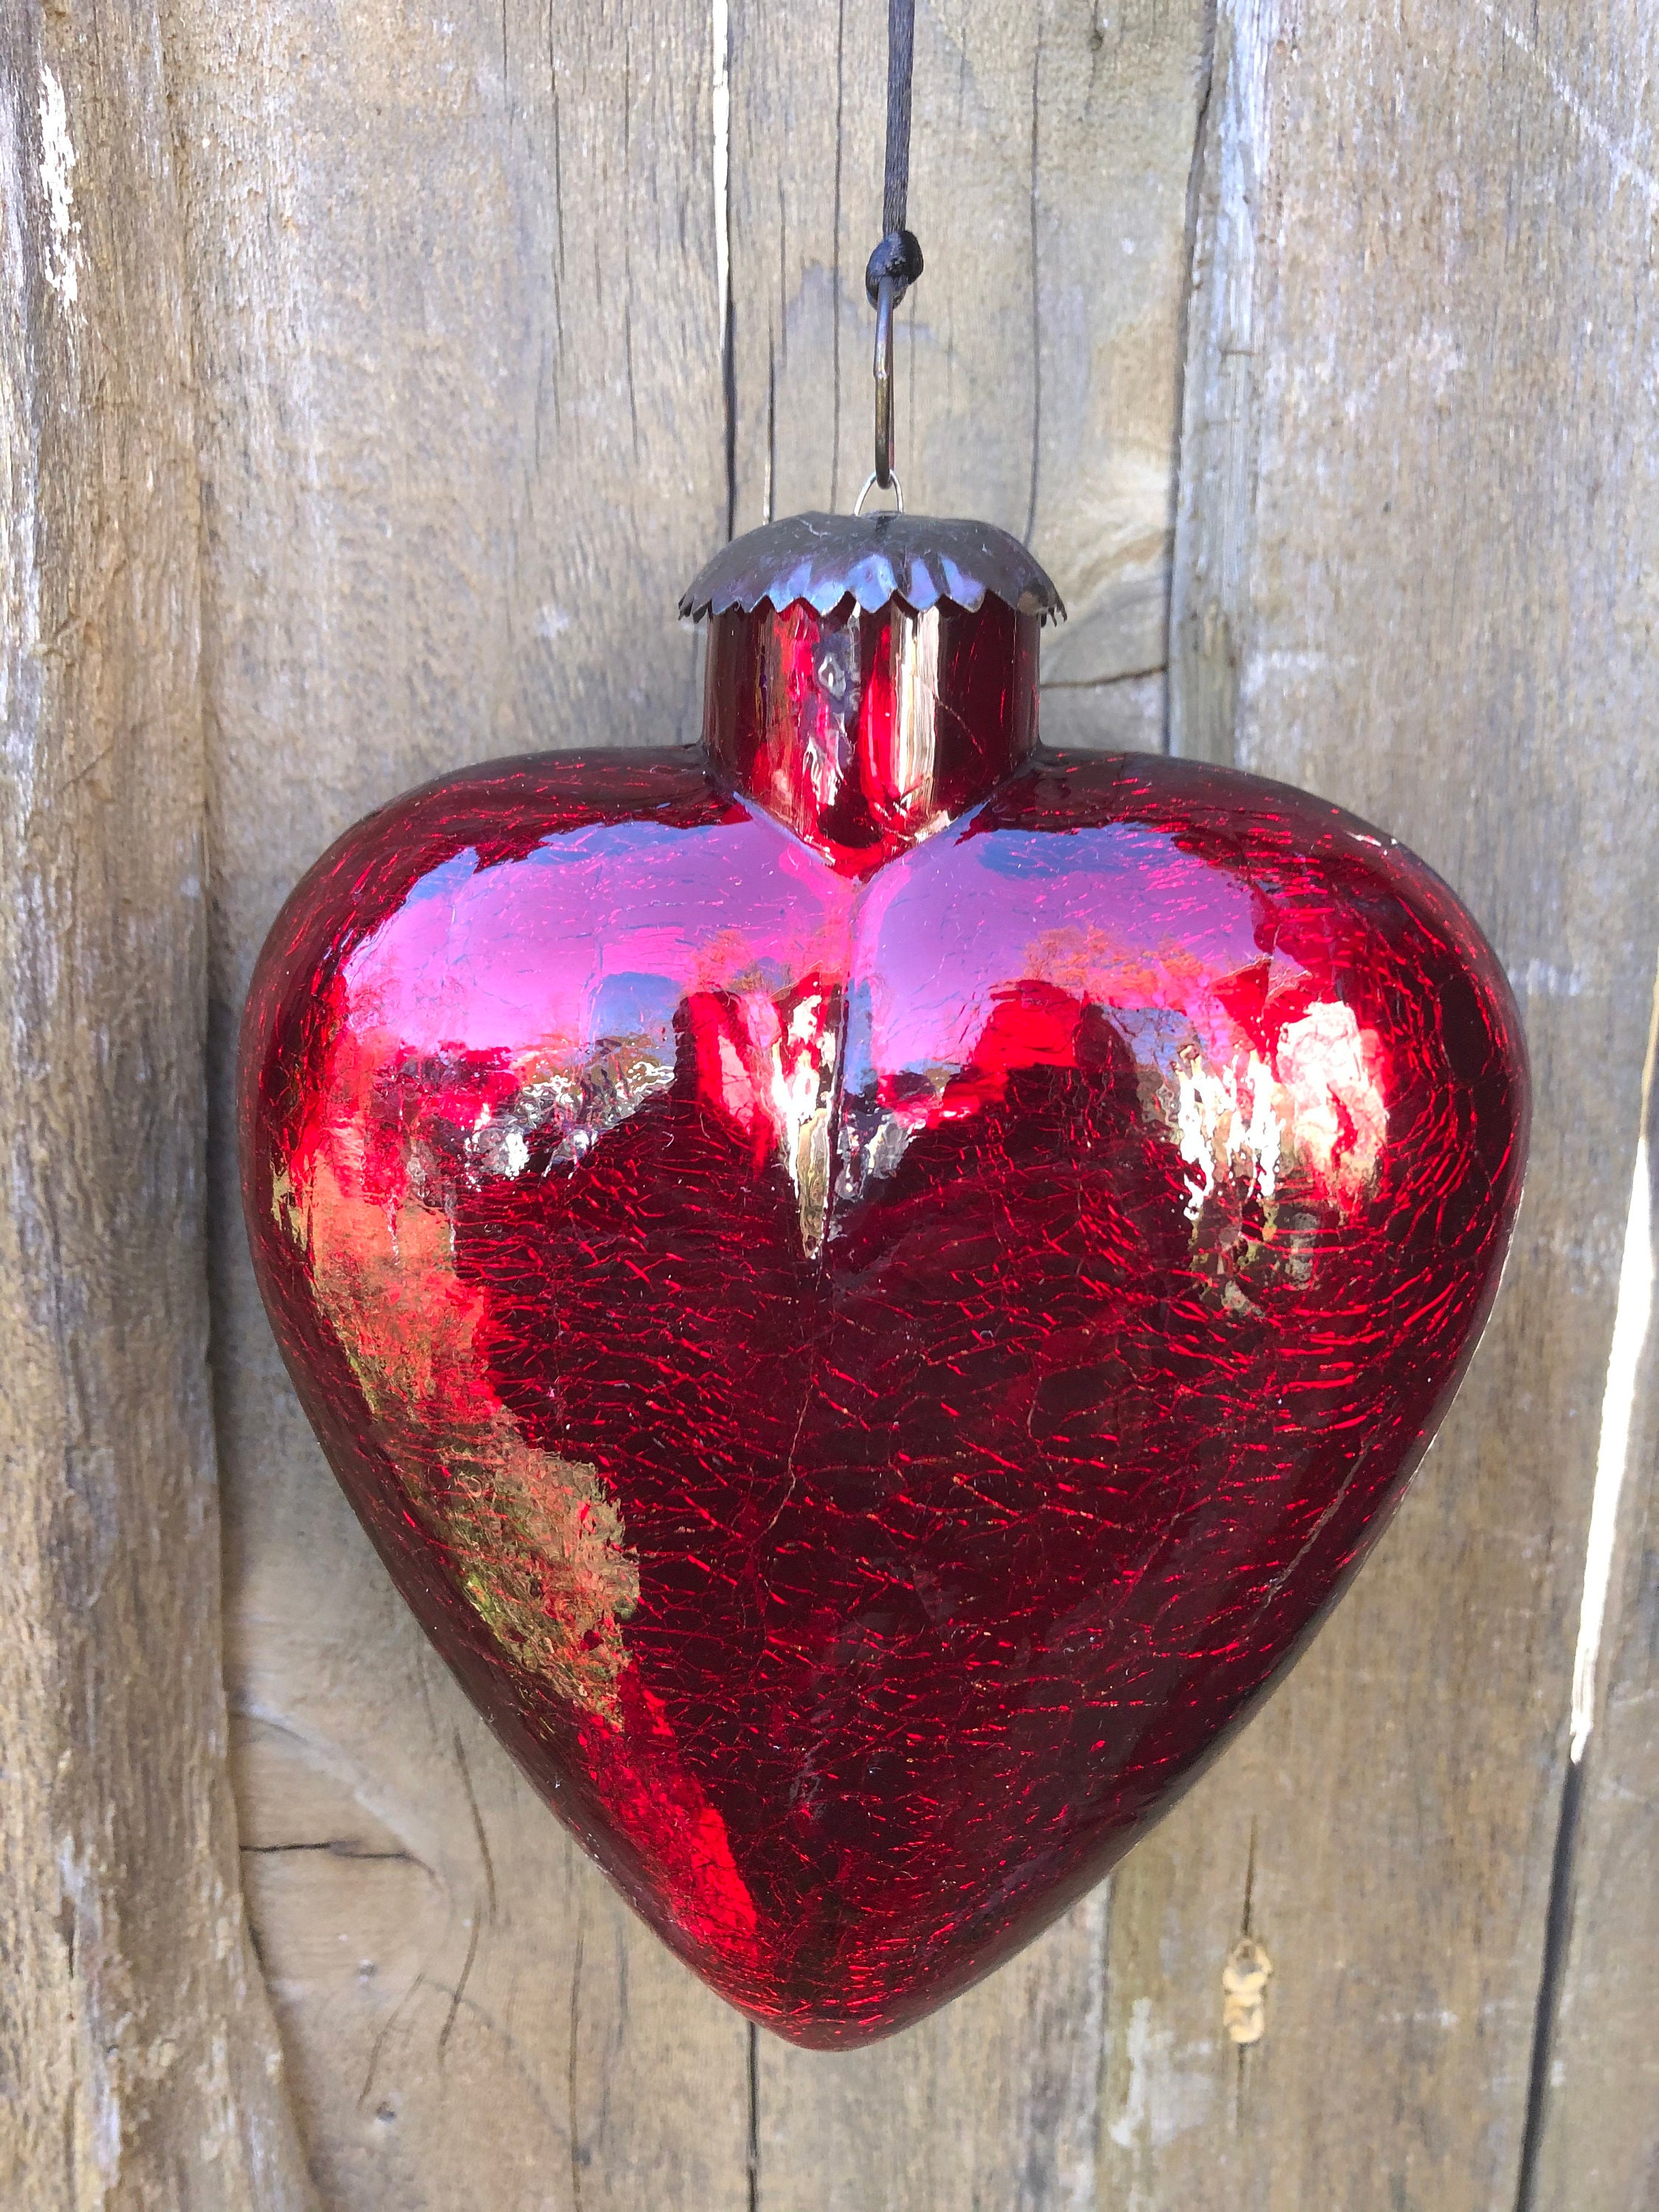 Mercury Glass Heart Ornaments From India 